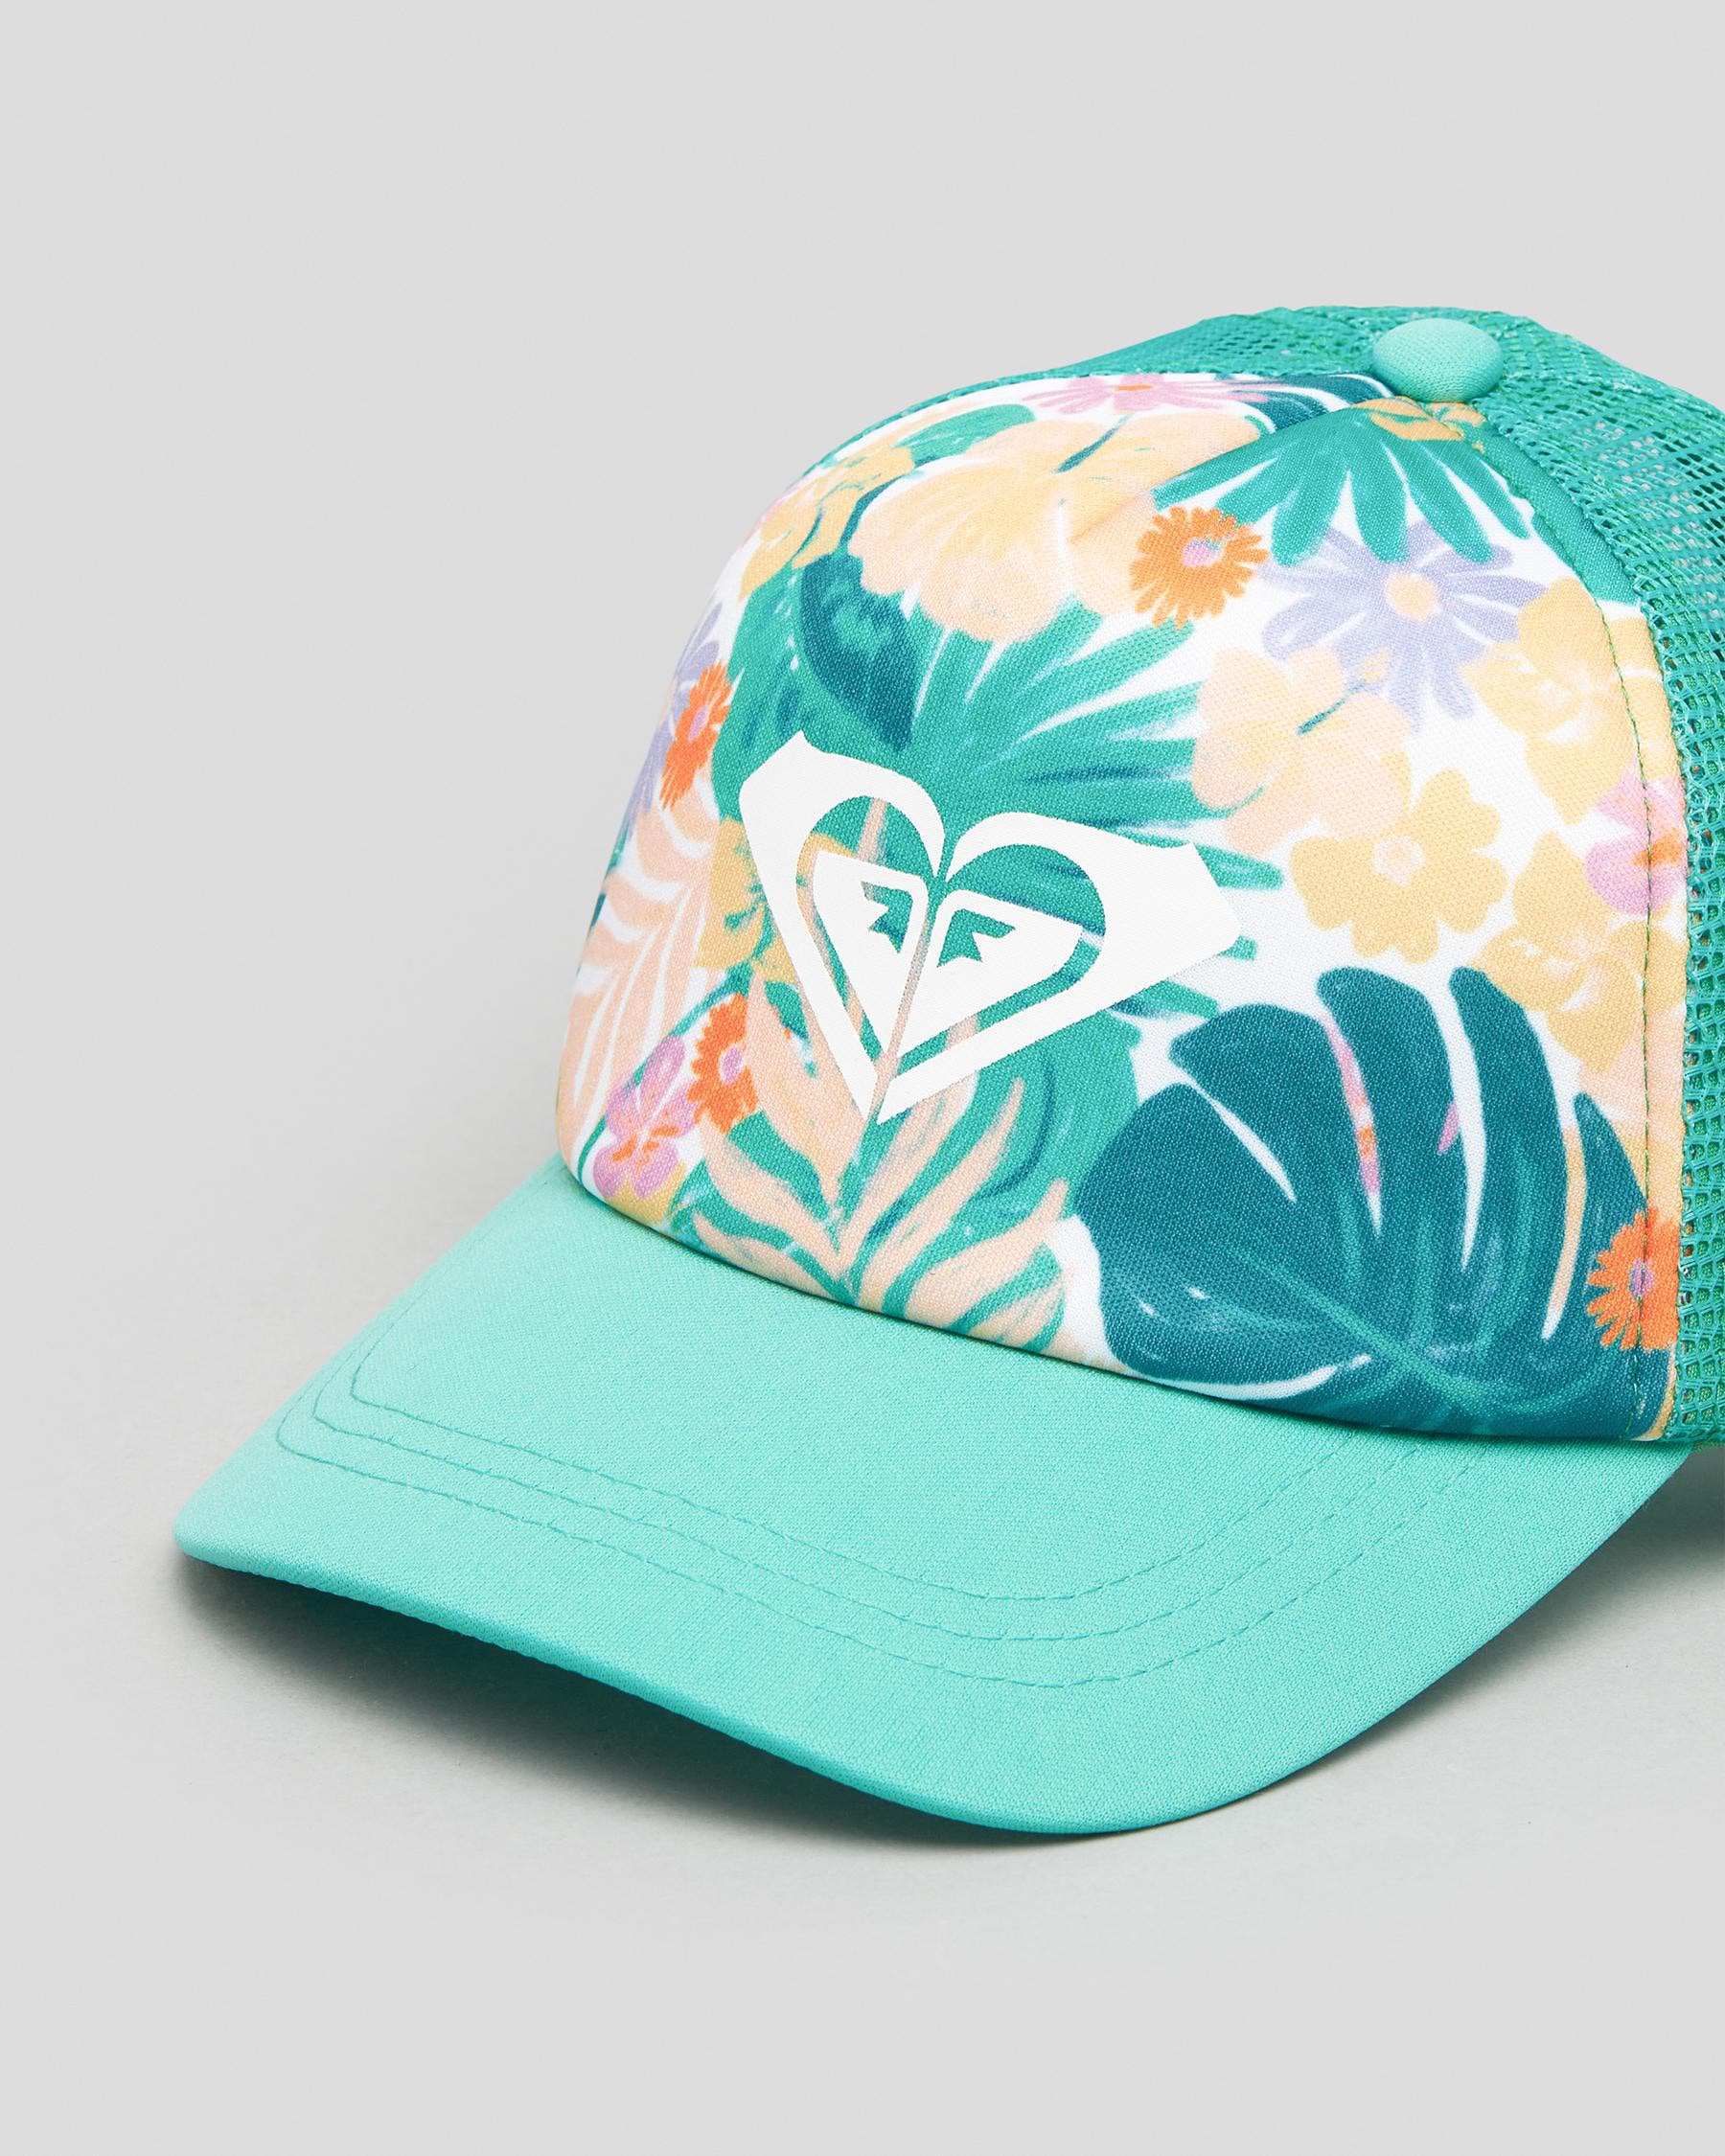 Roxy Toddlers\' Sweet Emotion In Mint & Trails FREE* Cap States Returns City Beach Tropical - - Trucker Shipping Easy United